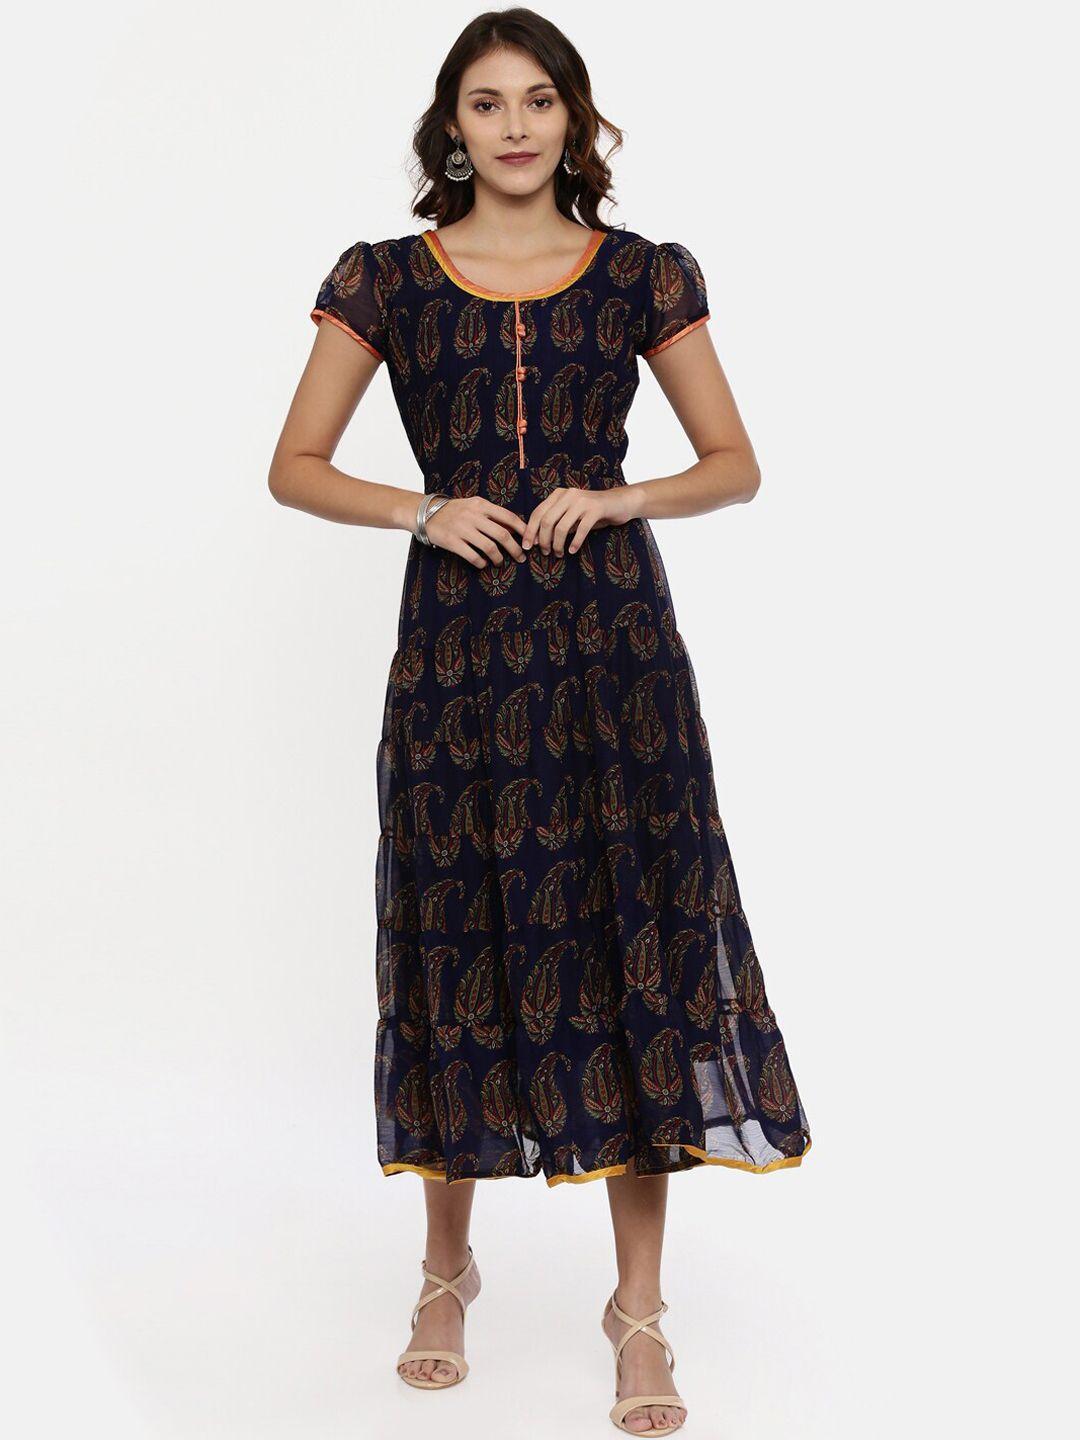 souchii women navy blue printed fit and flare dress